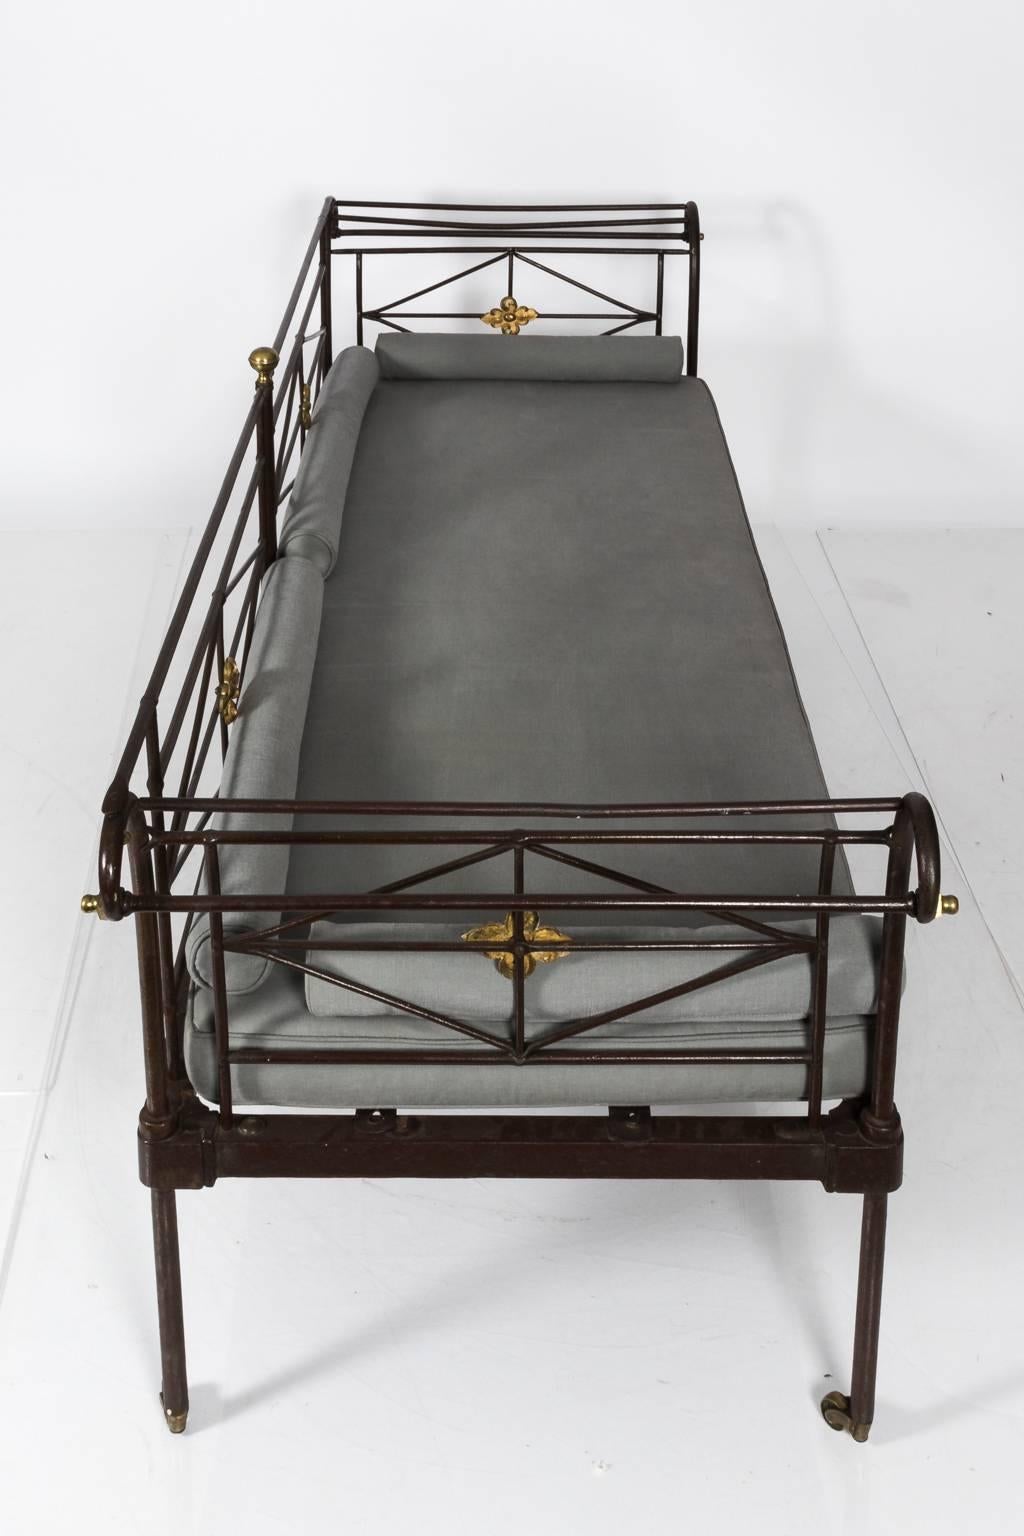 Painted RW Winfield & Son Cast Iron Daybed, circa 1890s